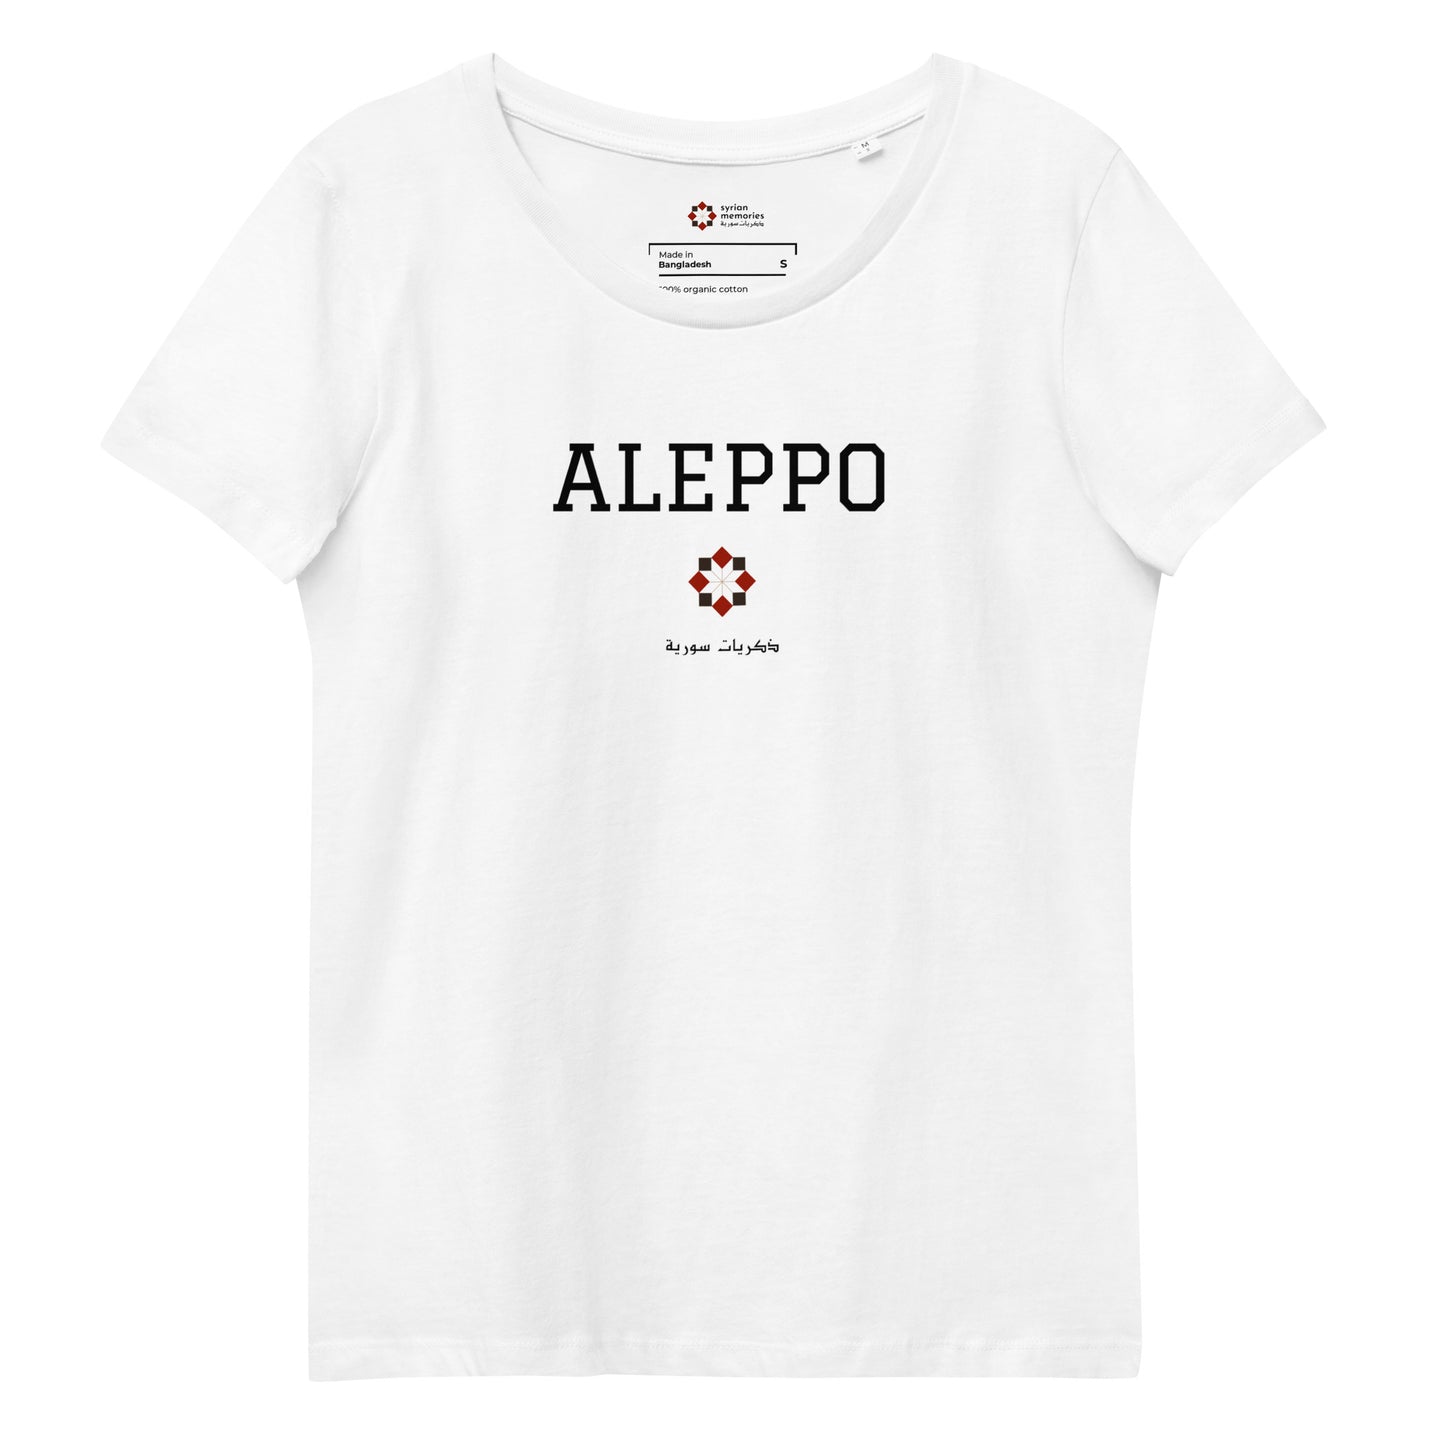 Aleppo - University Collection - Women's Fitted Eco Tee